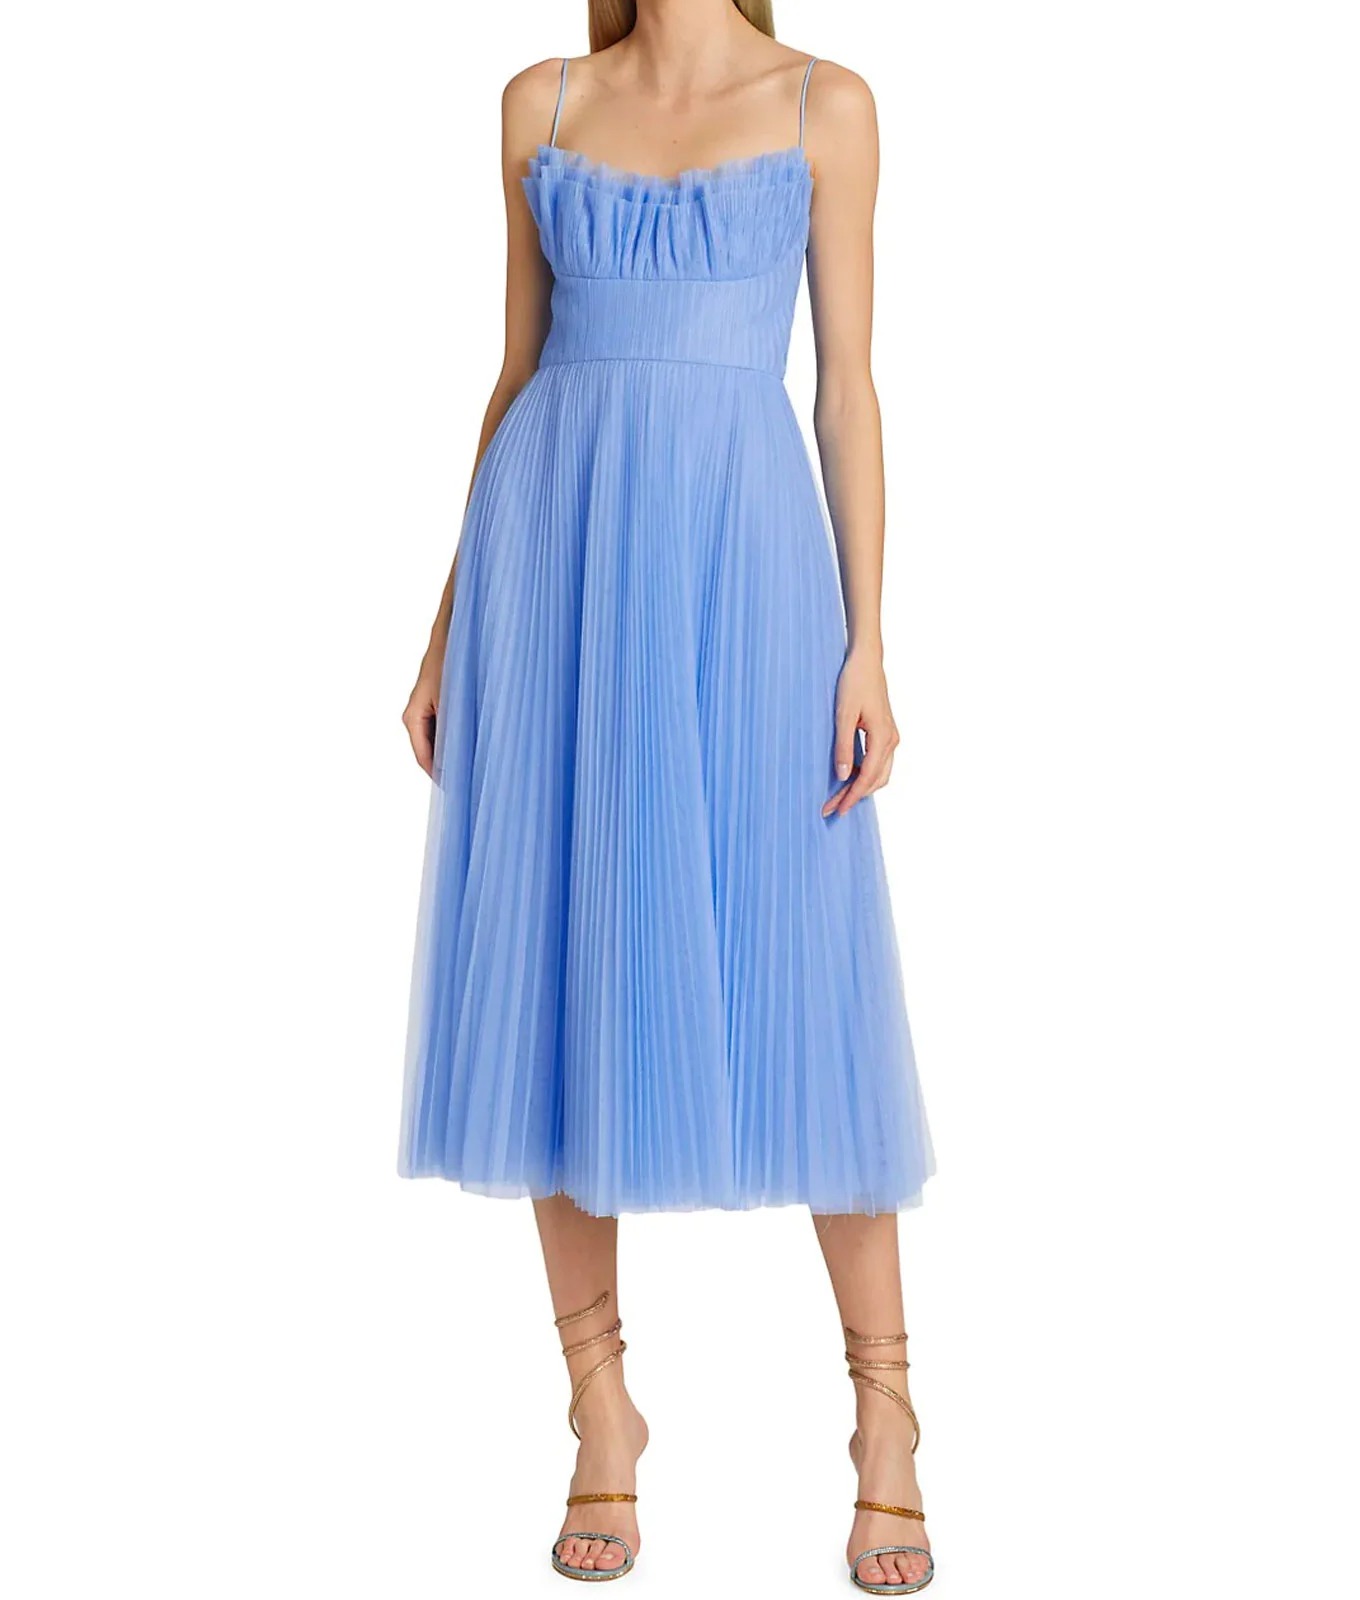 Winter Wedding Guest Dresses - Color & Chic